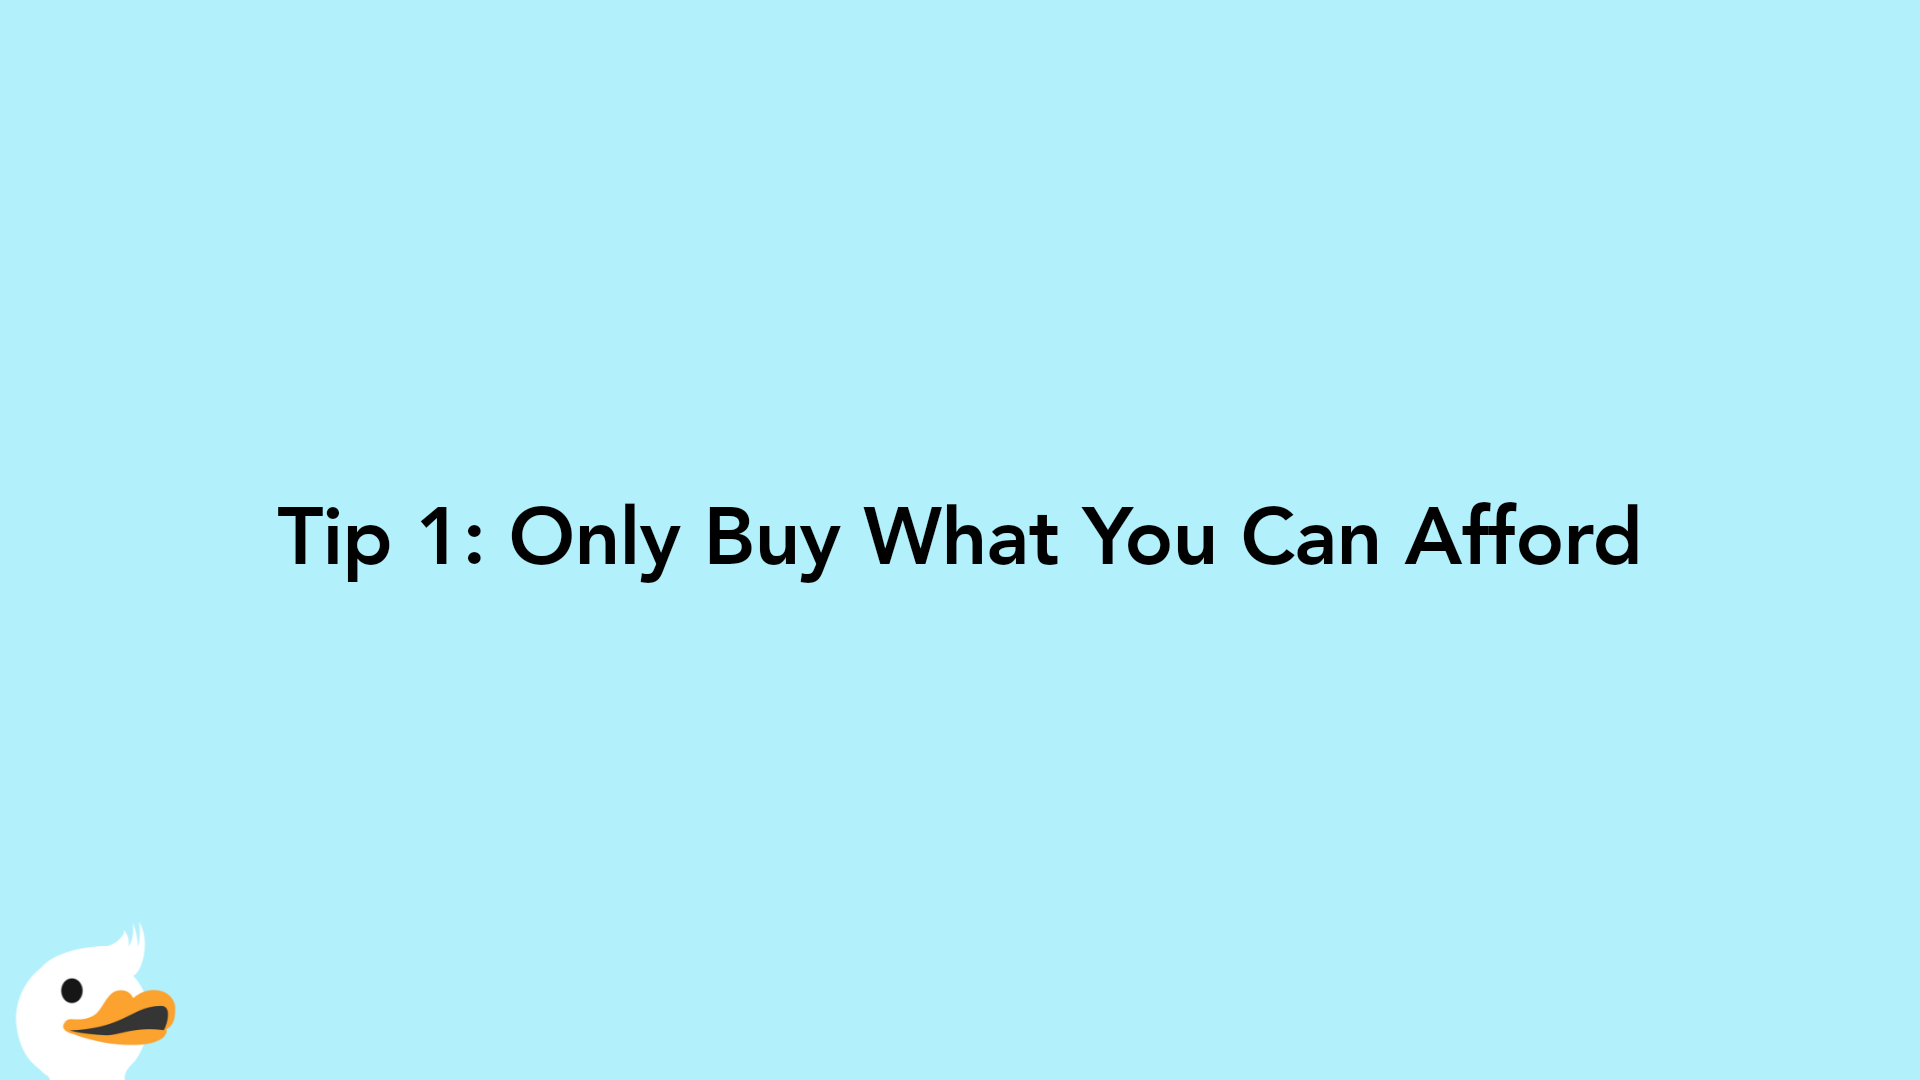 Tip 1: Only Buy What You Can Afford